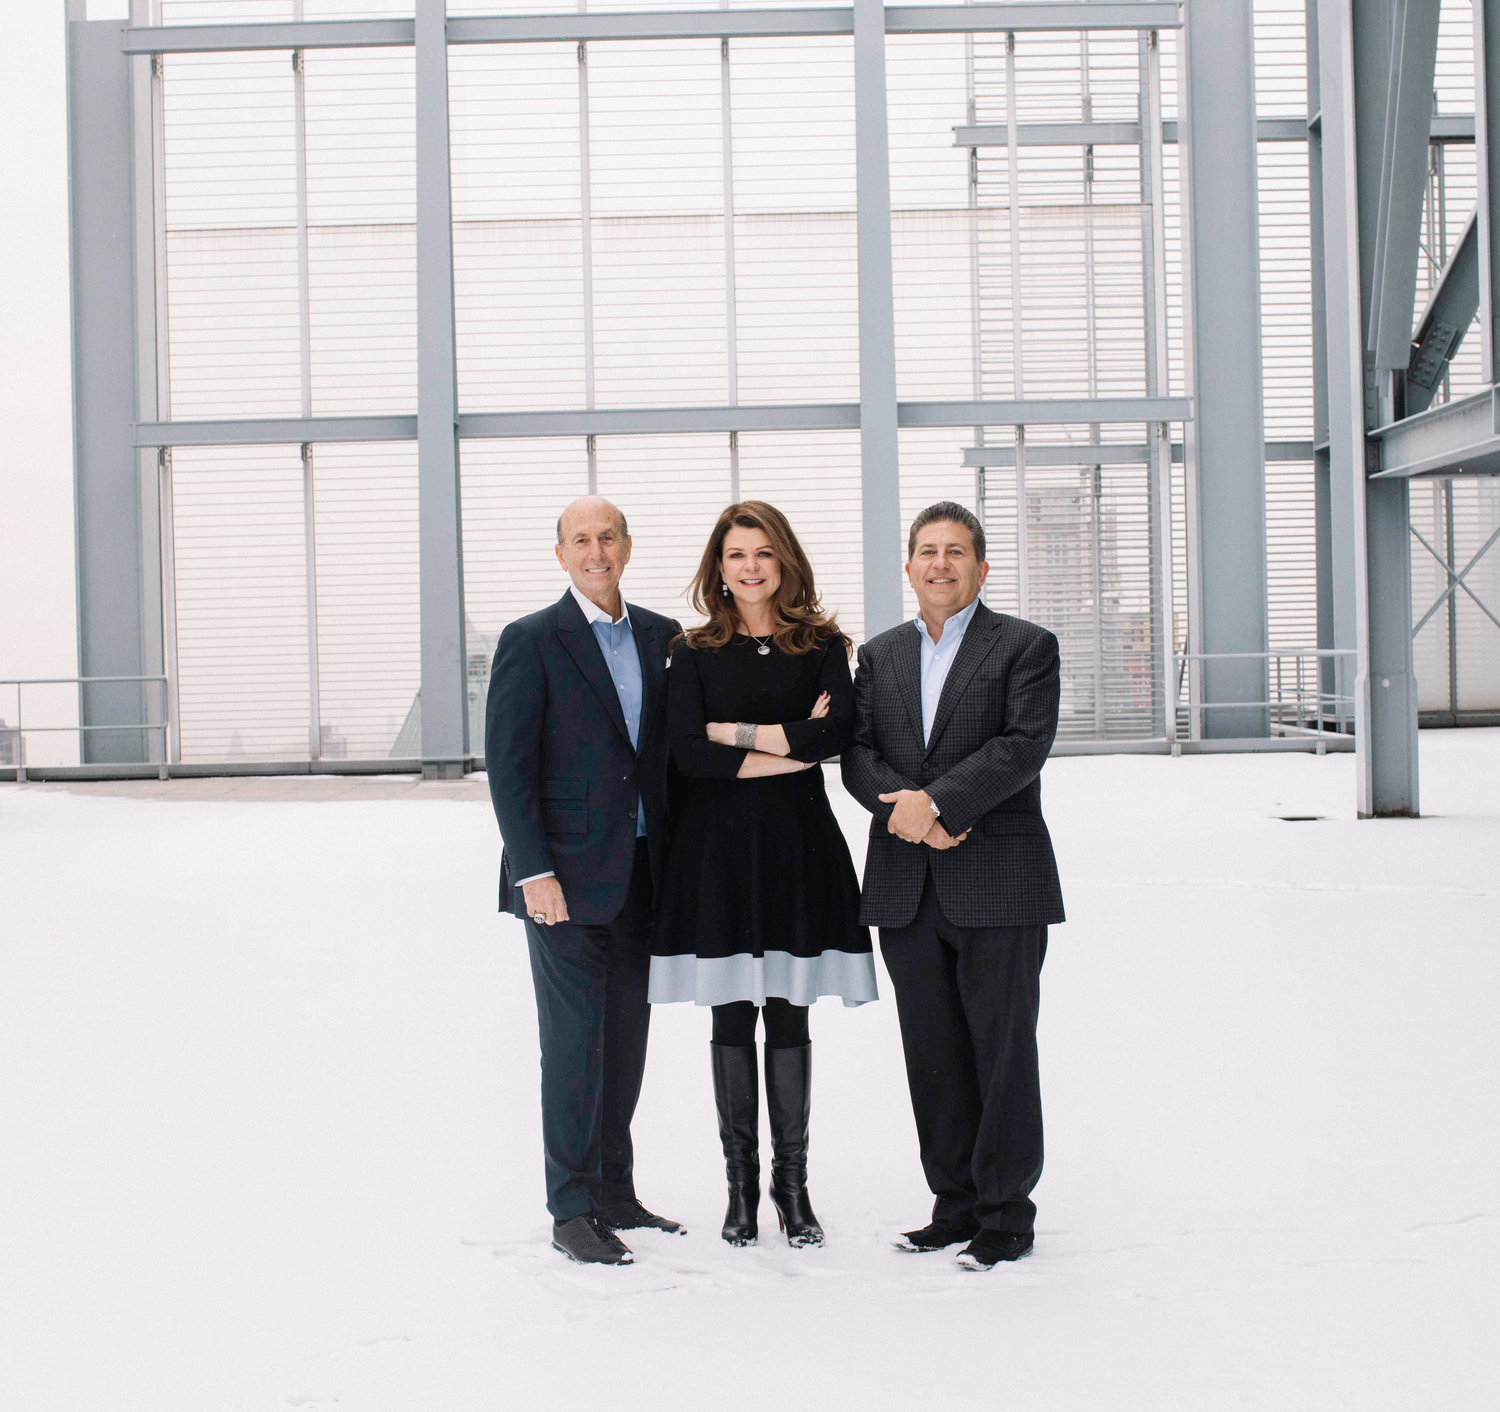 The founders of L&L MAG - David Levinson, MaryAnne Gilmartin, and Robert Lapidus.